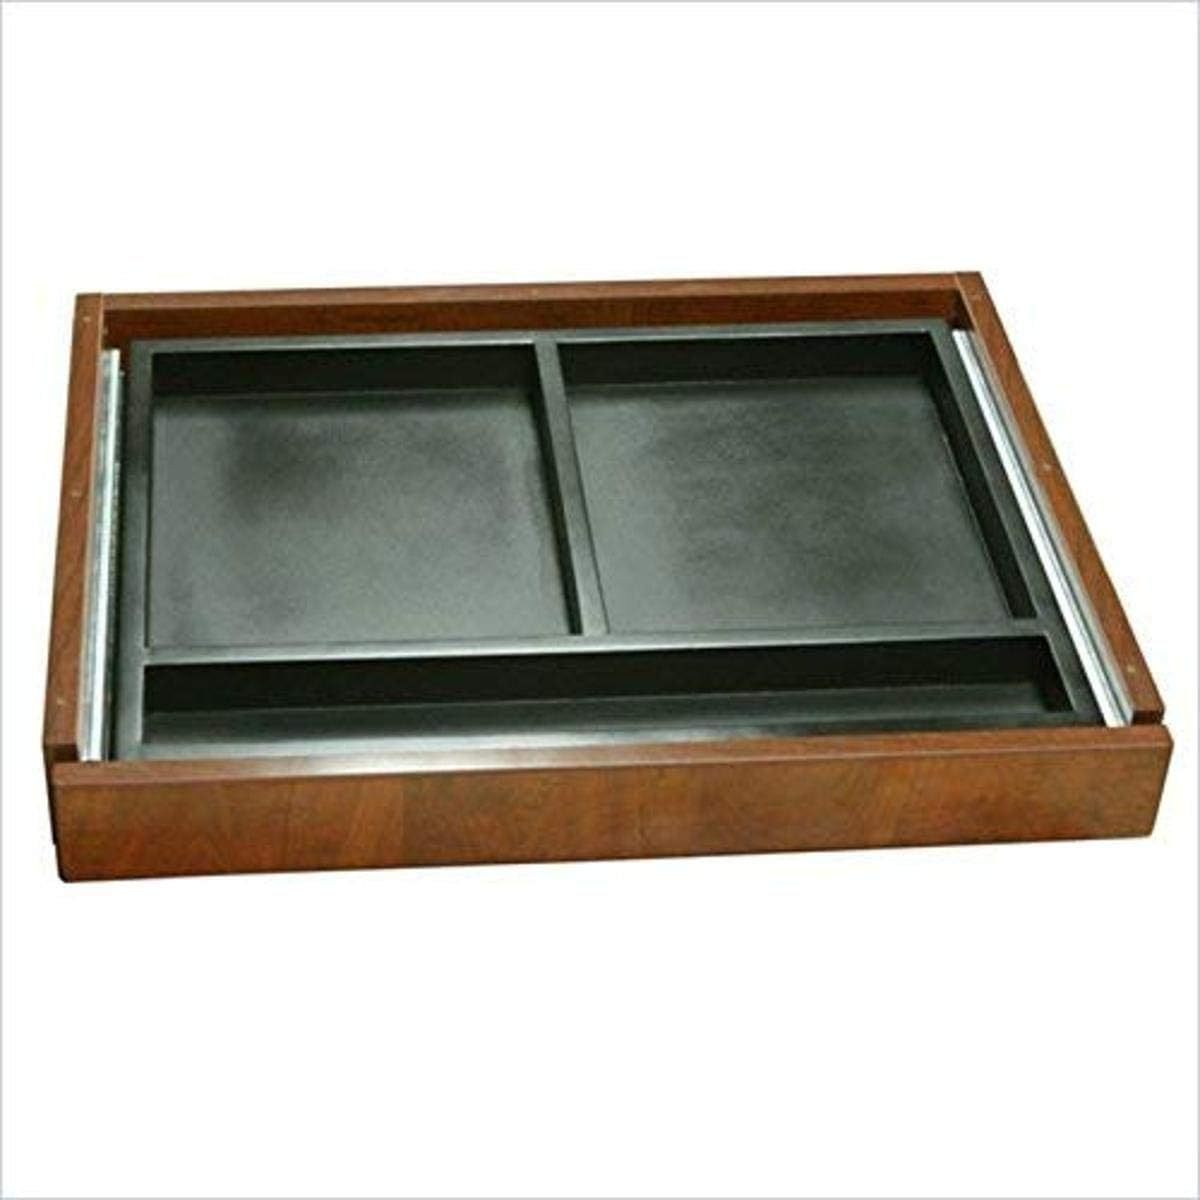 Boss Office Products Cherry Center Drawer. - $67.98